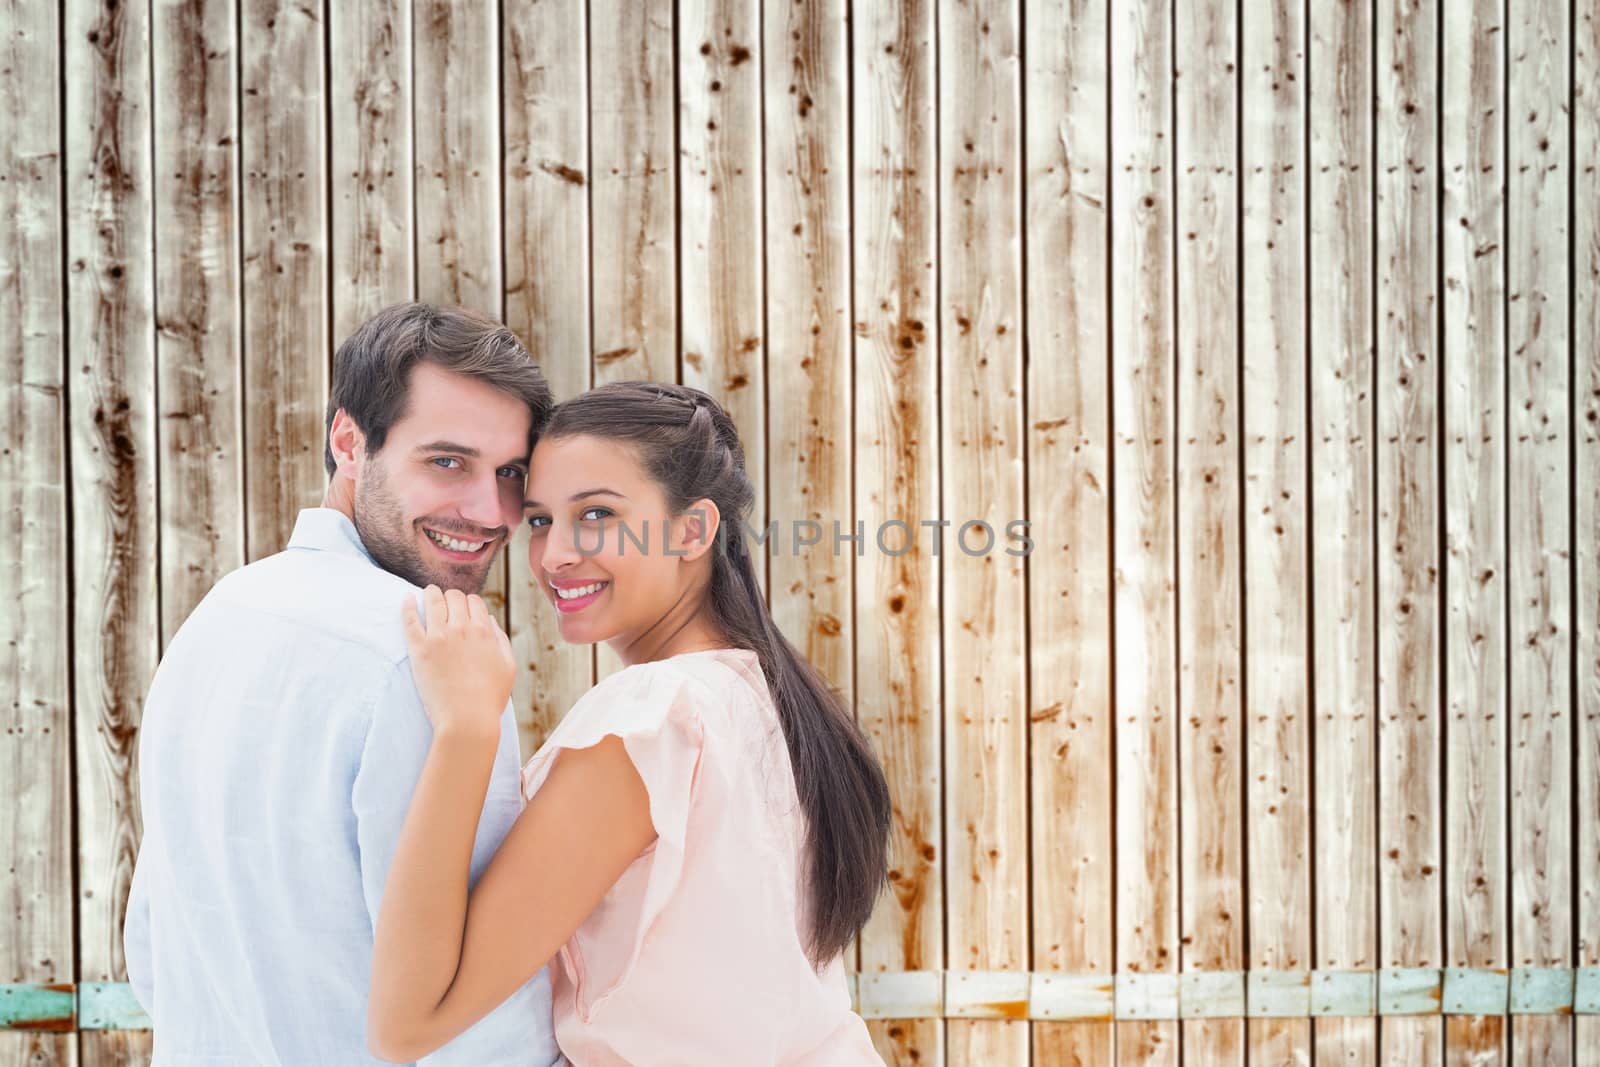 Attractive young couple smiling at camera against faded pine wooden planks